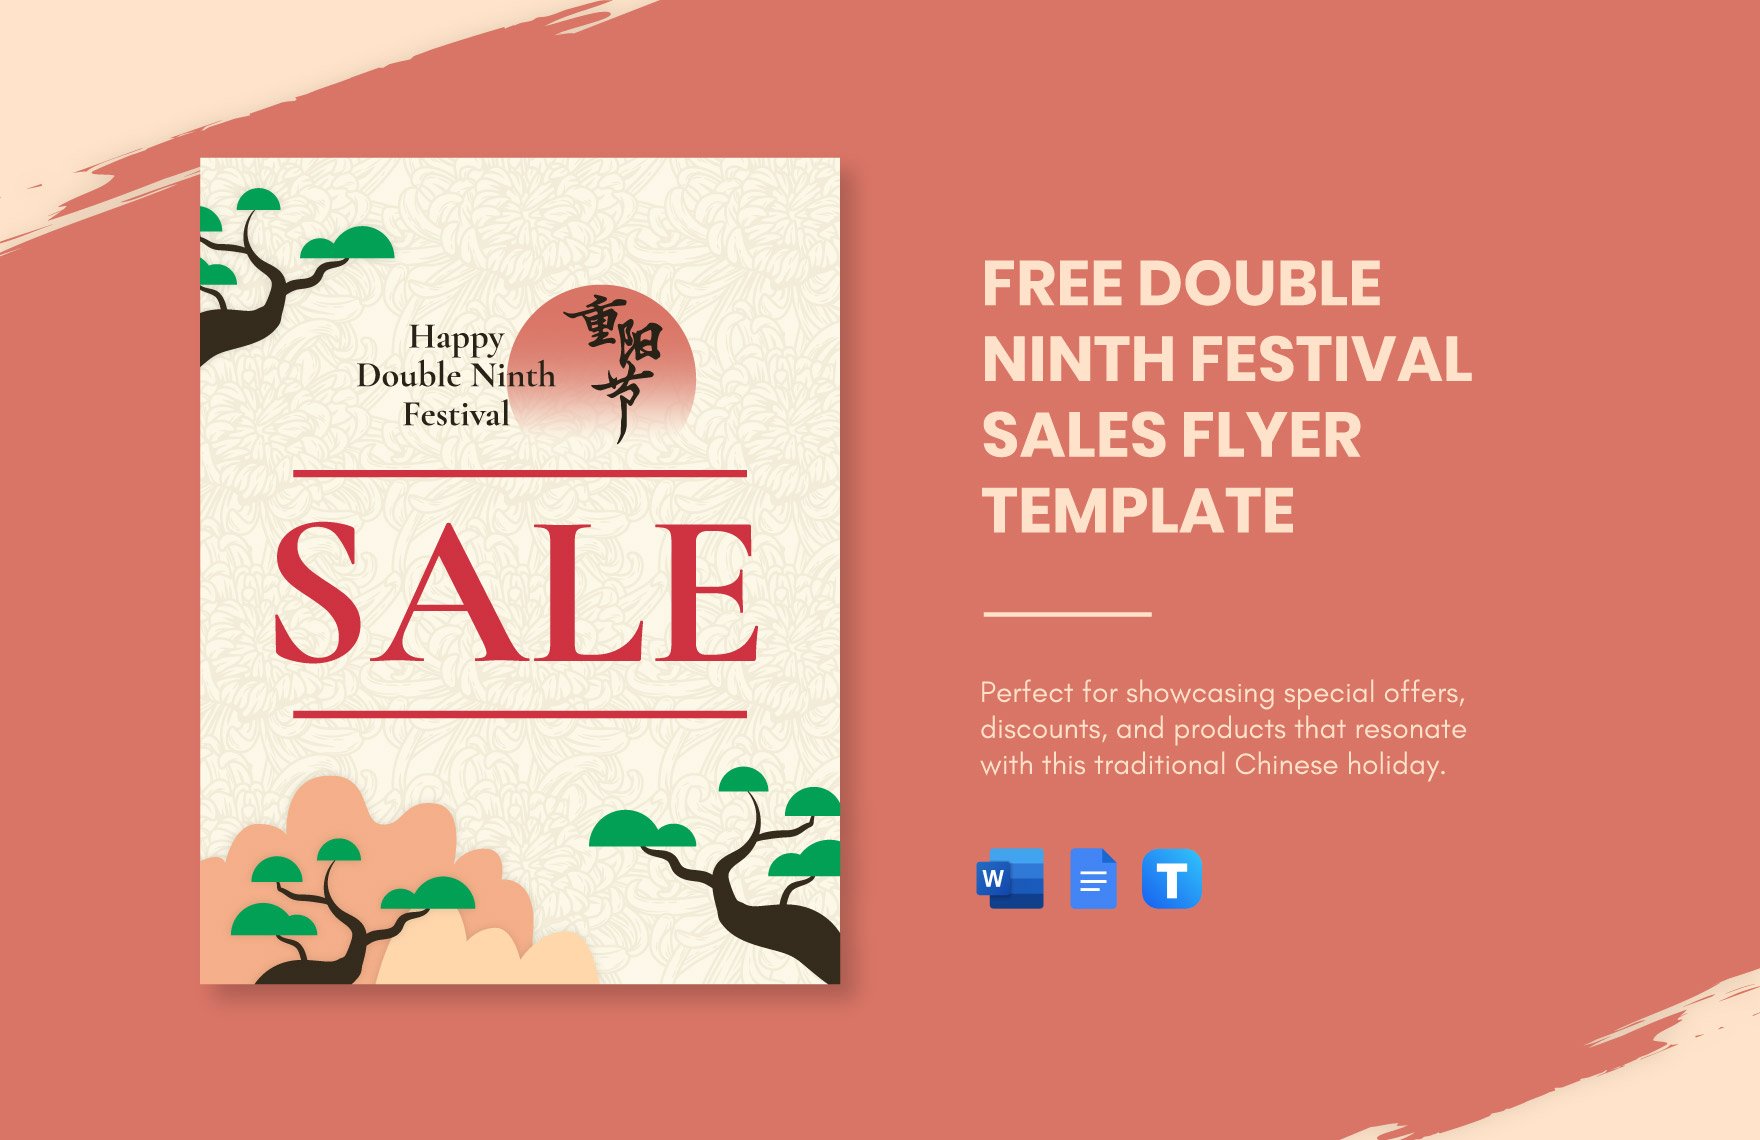 Free Double Ninth Festival Sales Flyer Template in Word, Google Docs